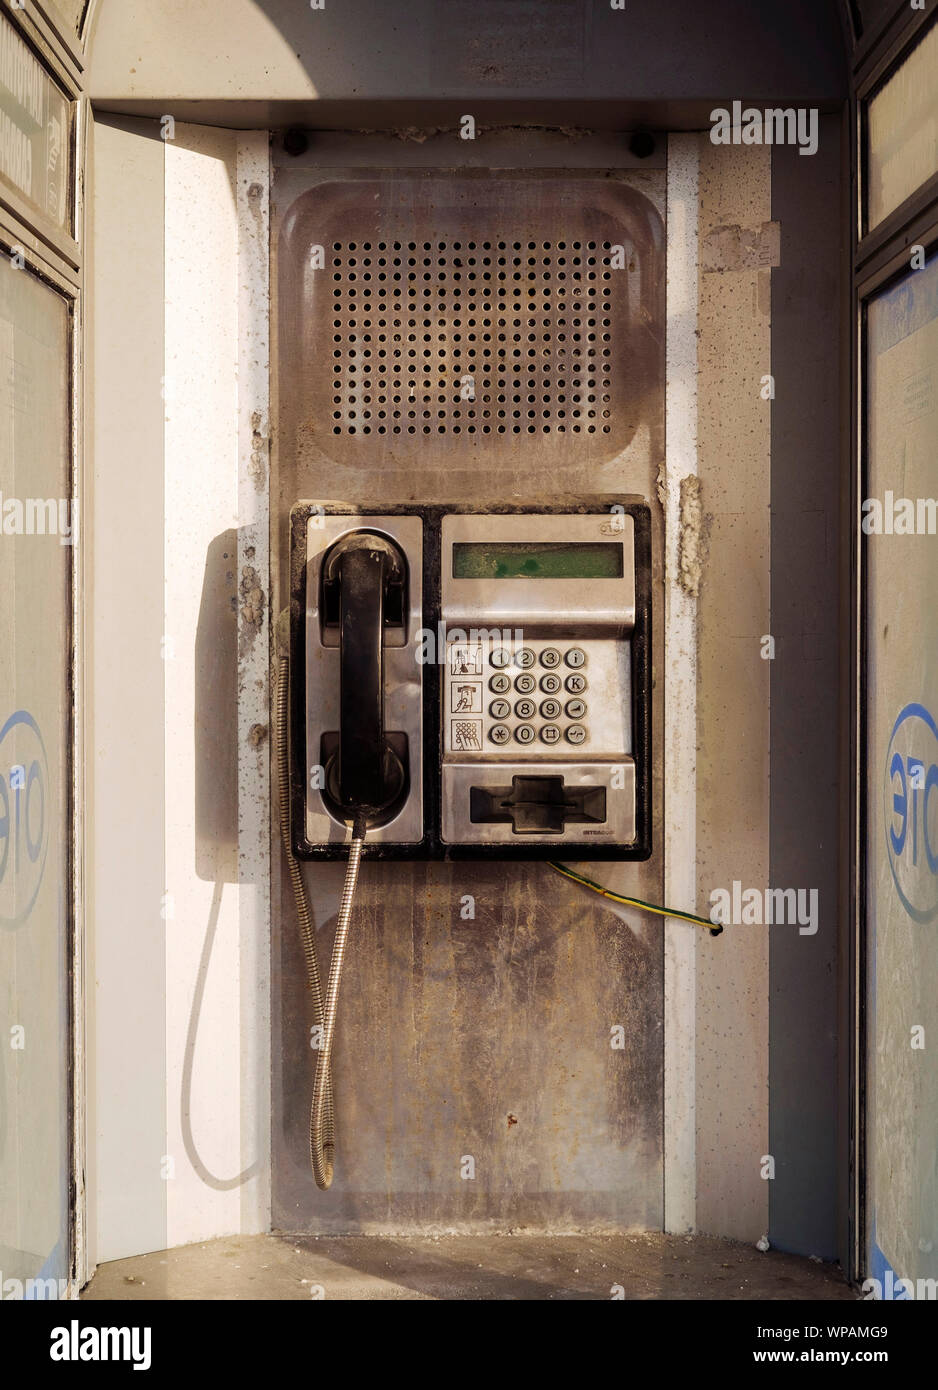 Old public phone booth, close up Stock Photo